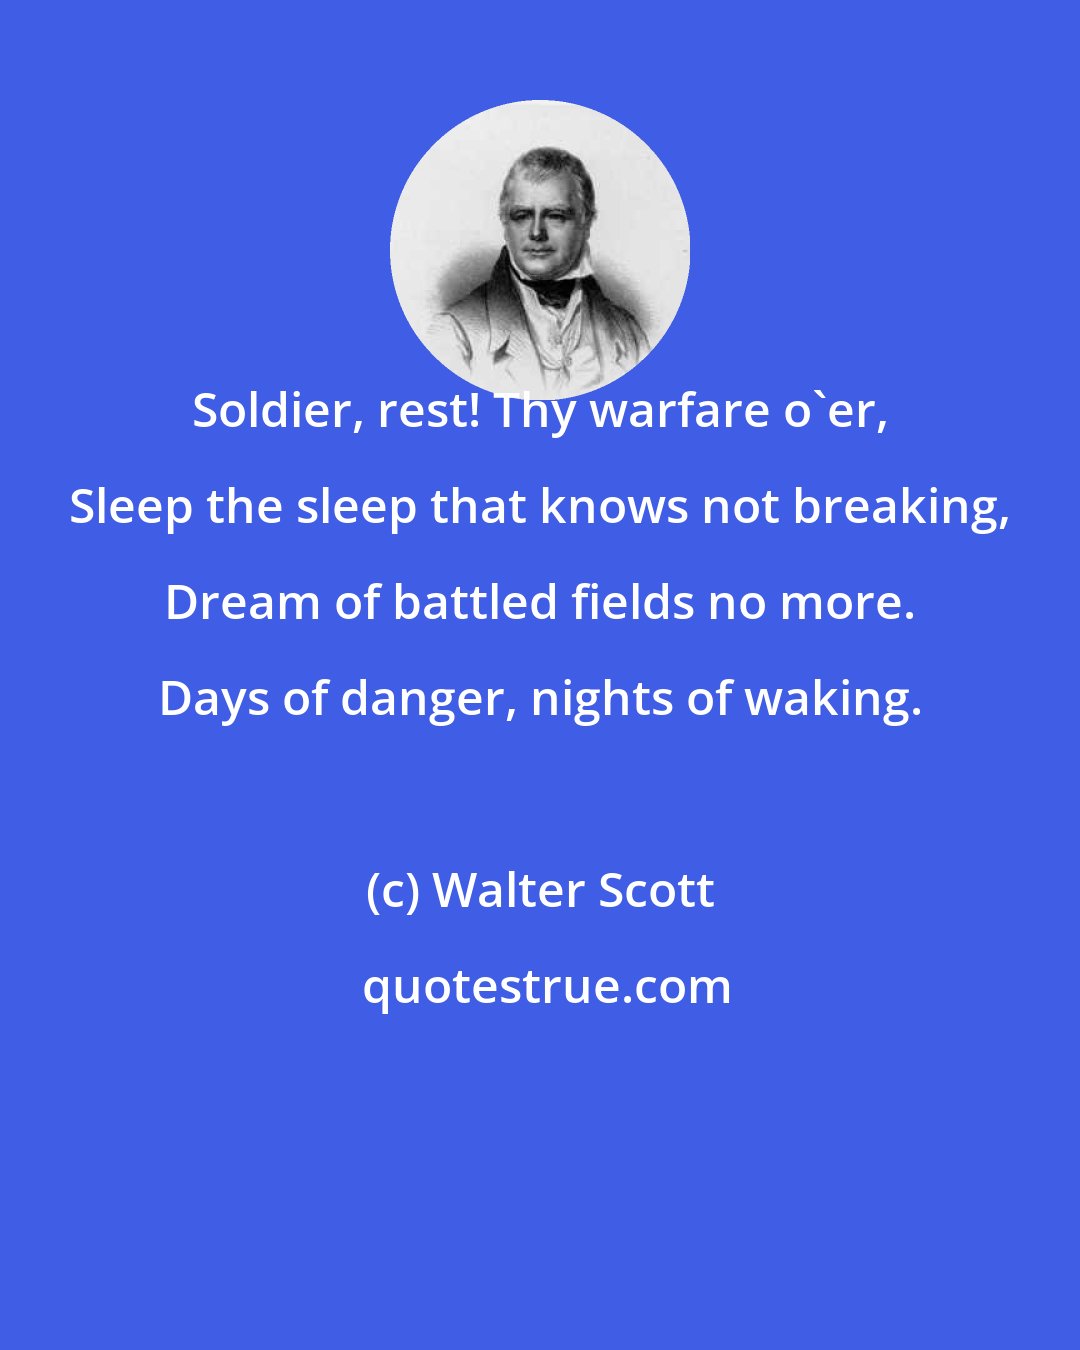 Walter Scott: Soldier, rest! Thy warfare o'er, Sleep the sleep that knows not breaking, Dream of battled fields no more. Days of danger, nights of waking.